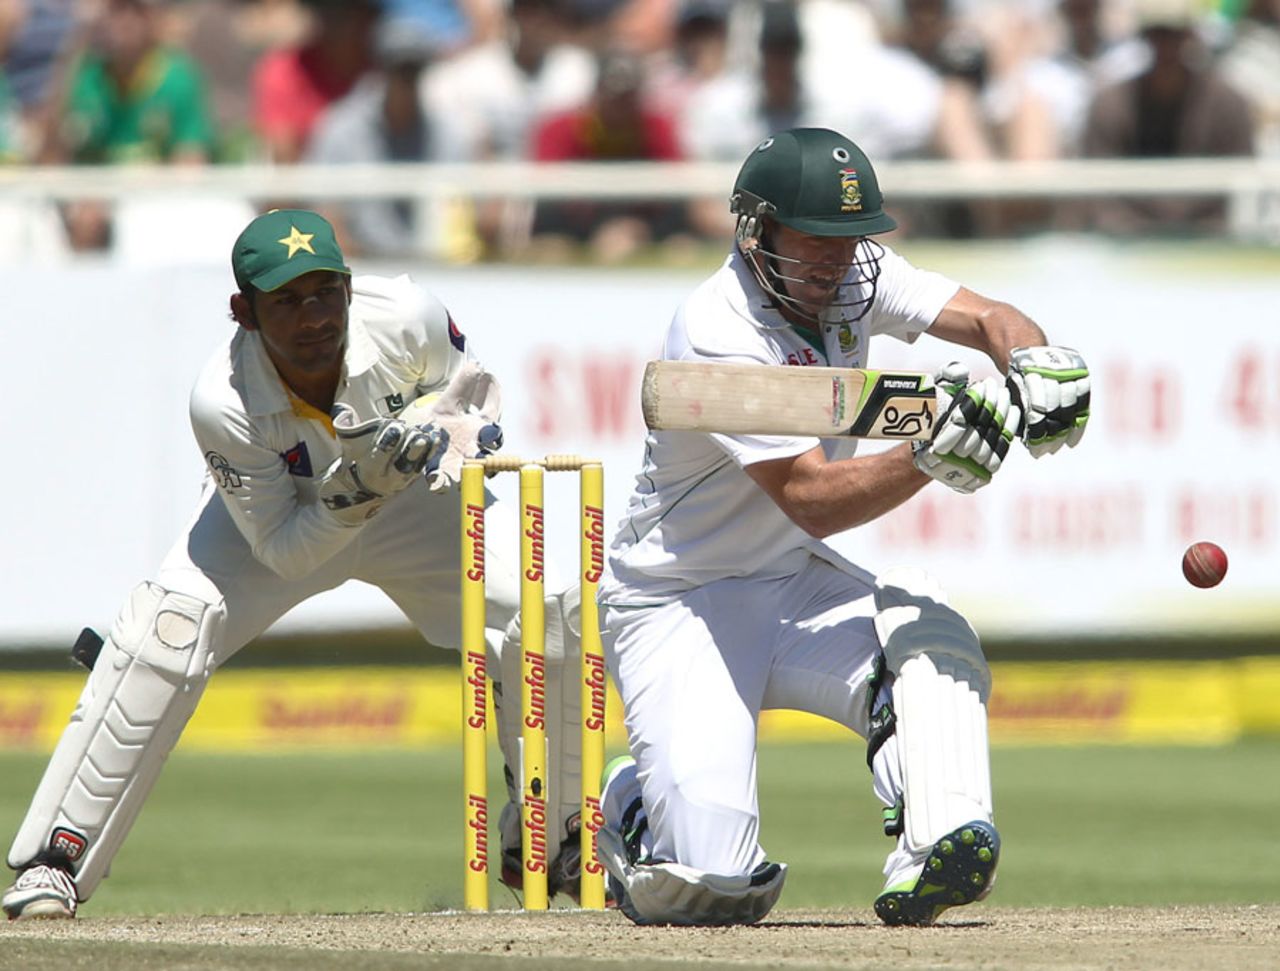 AB de Villiers gets in position to sweep, South Africa v Pakistan, 2nd Test, Cape Town, 3rd day, February 16, 2013